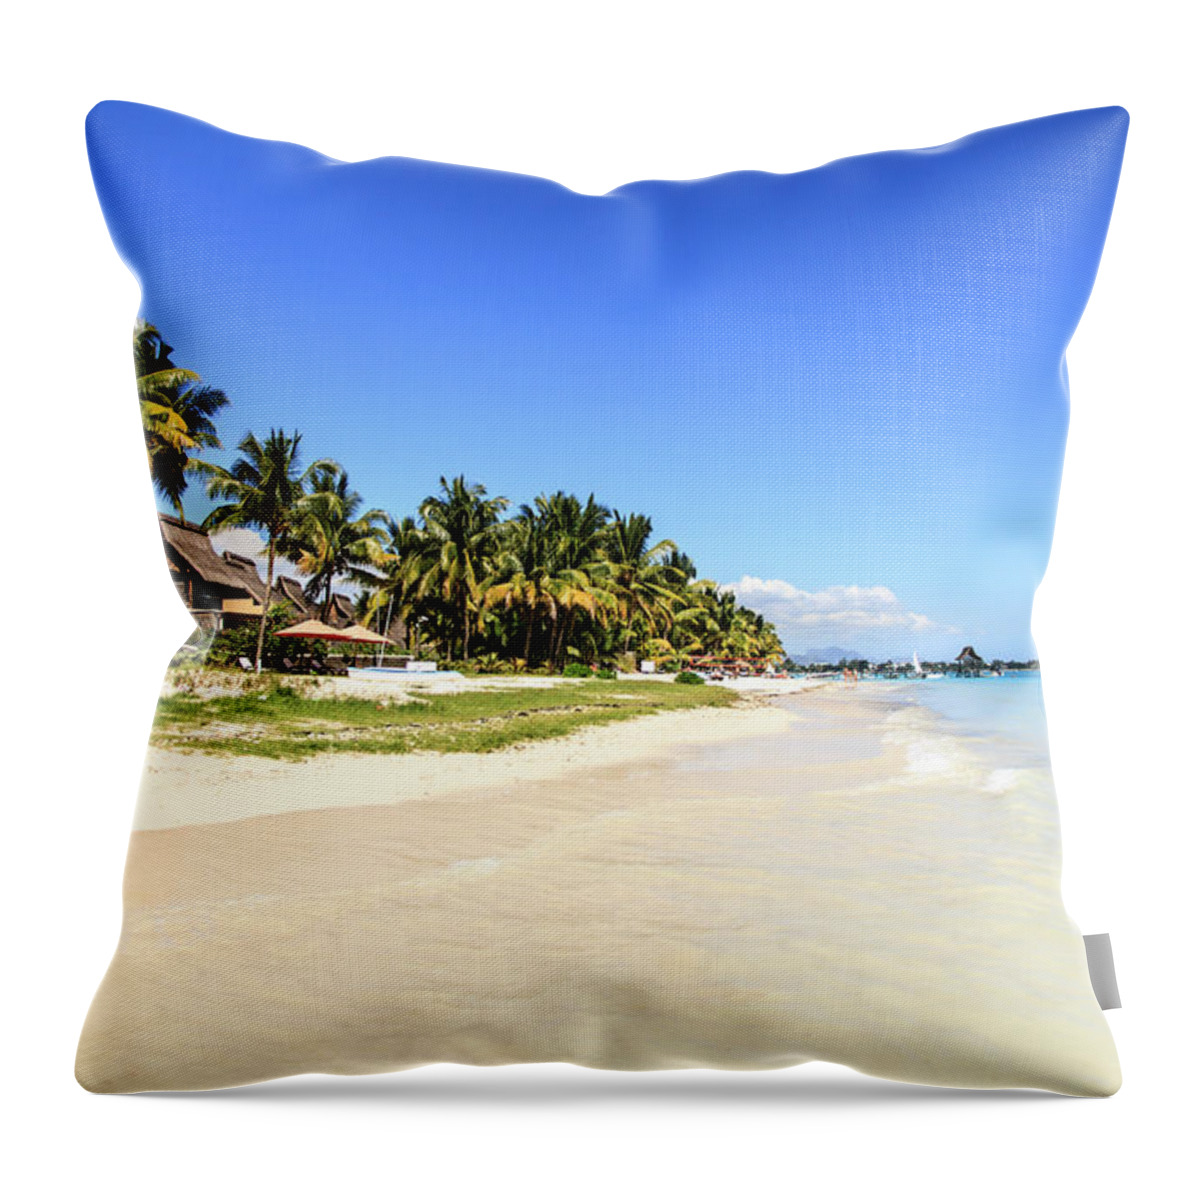 Tranquility Throw Pillow featuring the photograph Trou-aux-biches Beach Mauritius by Anna Shtraus Photography